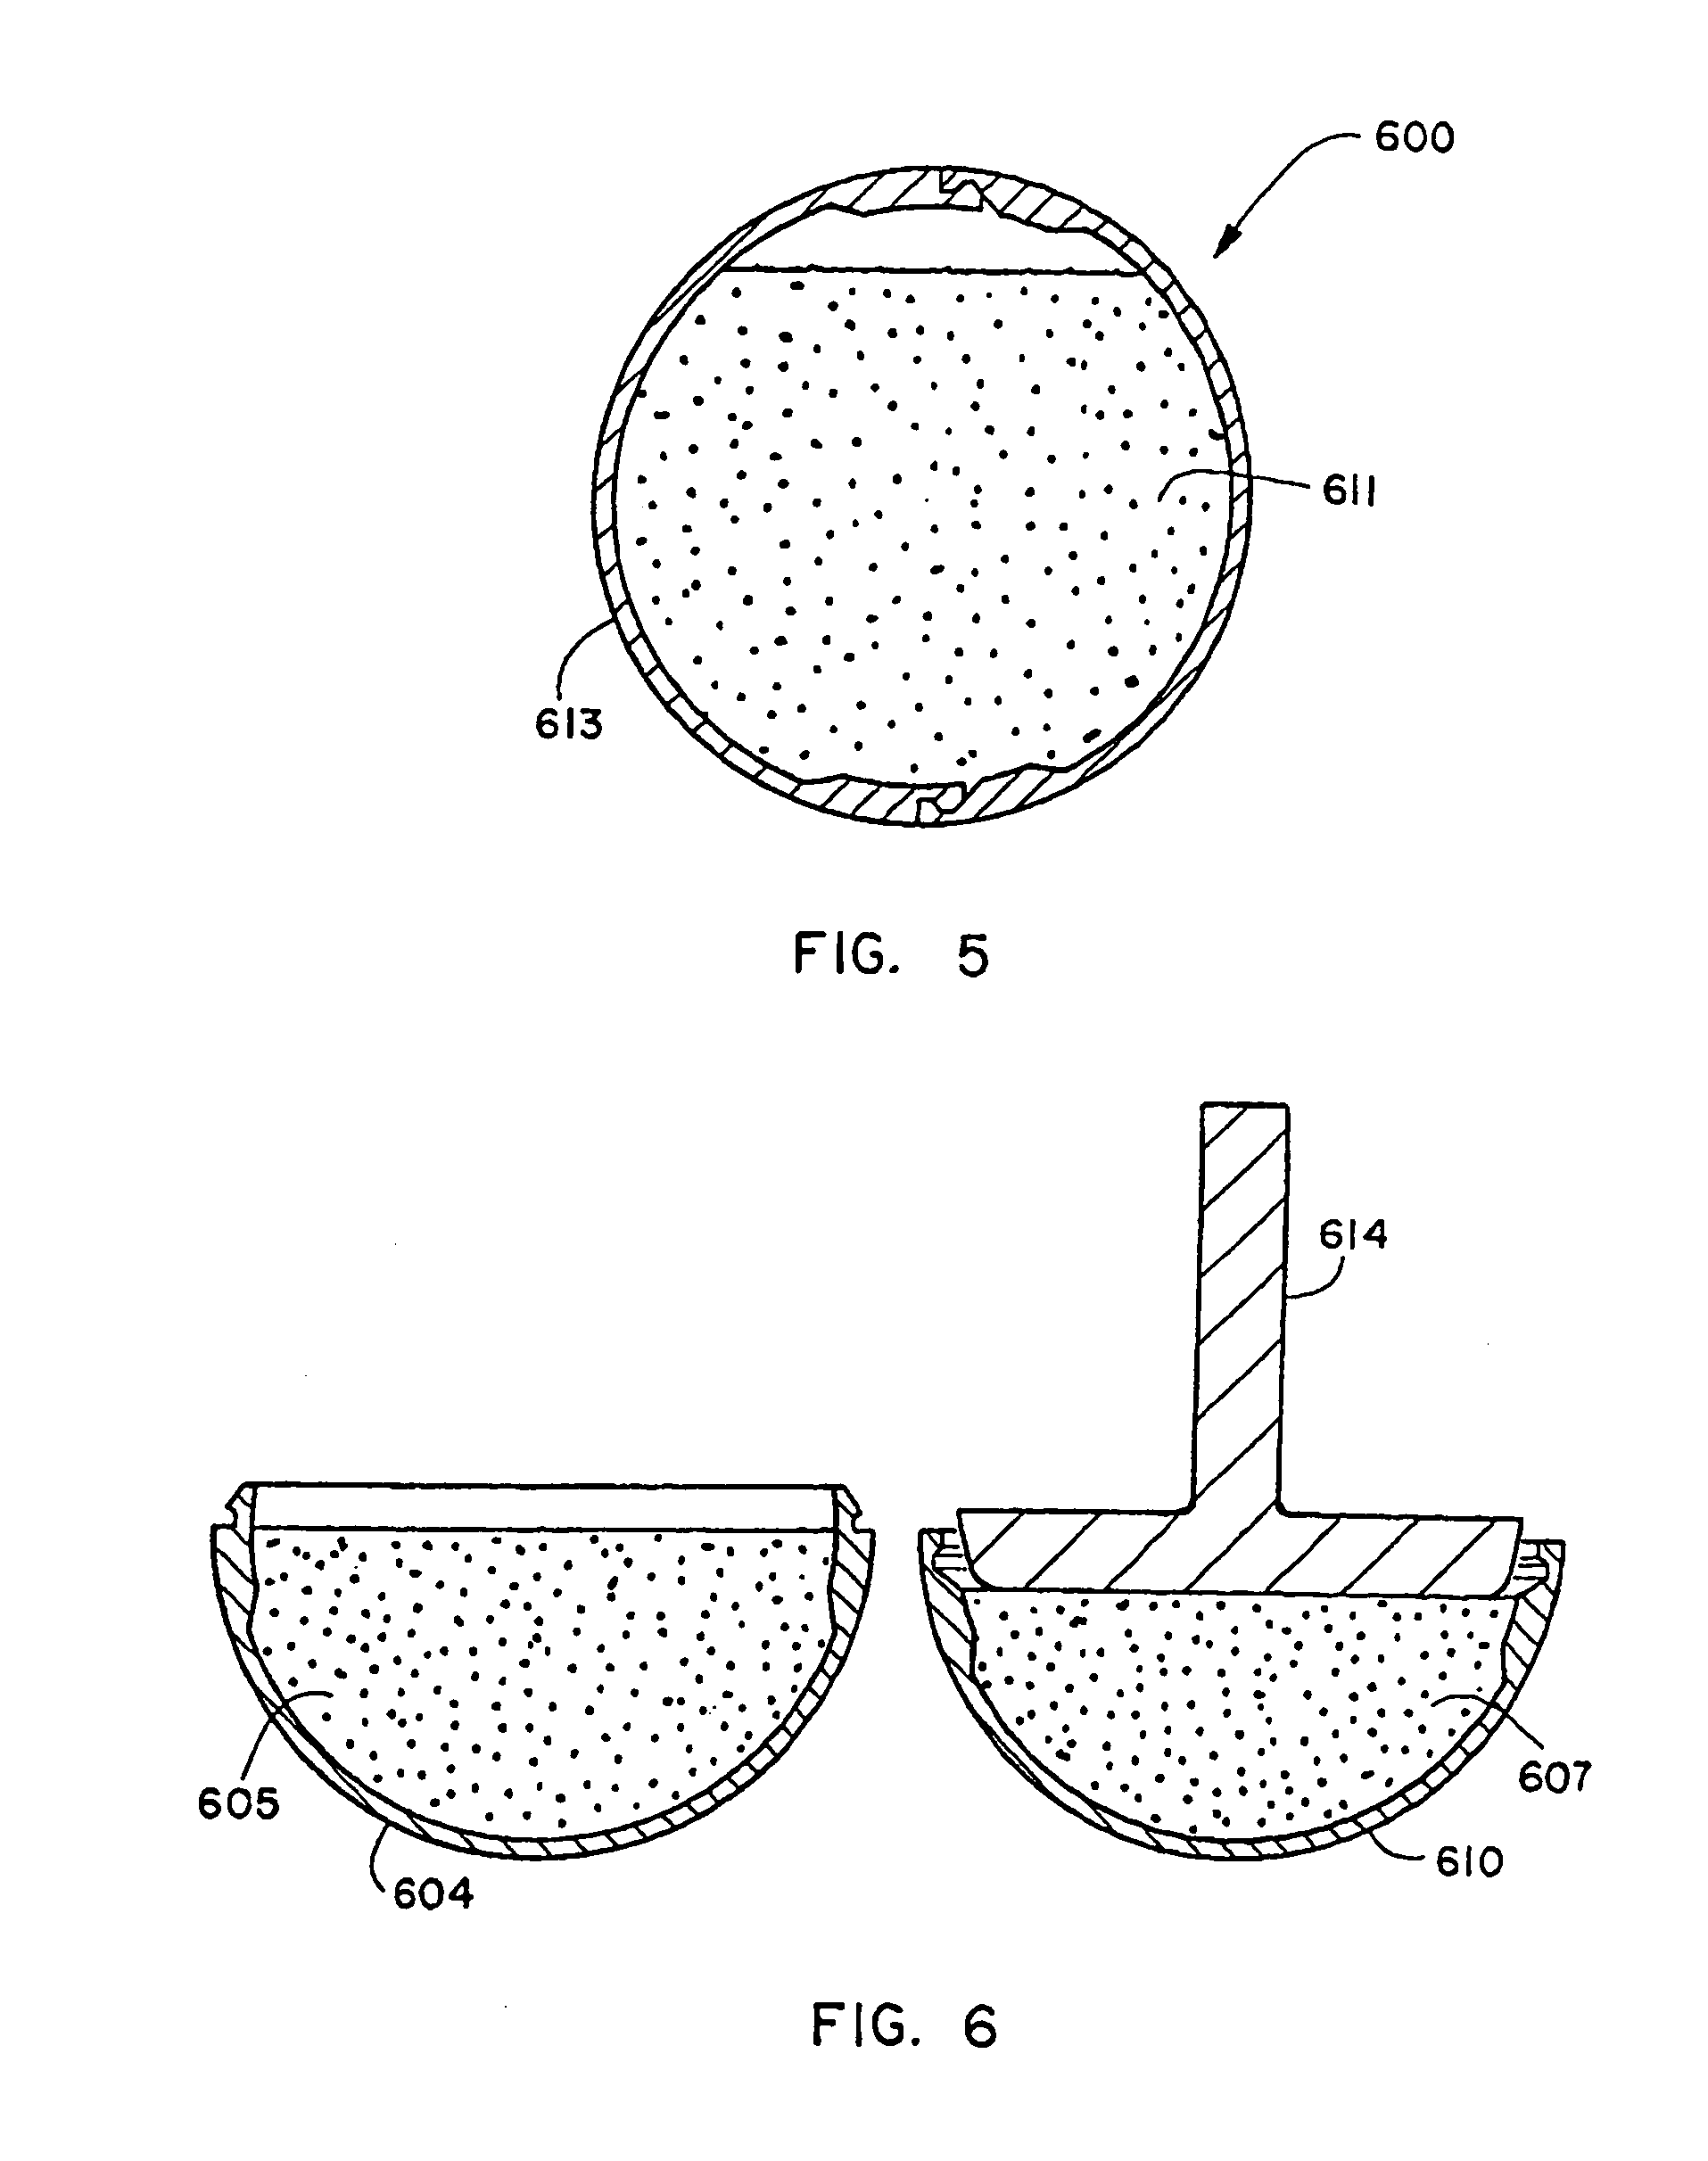 Non-lethal projectiles for delivering an inhibiting substance to a living target